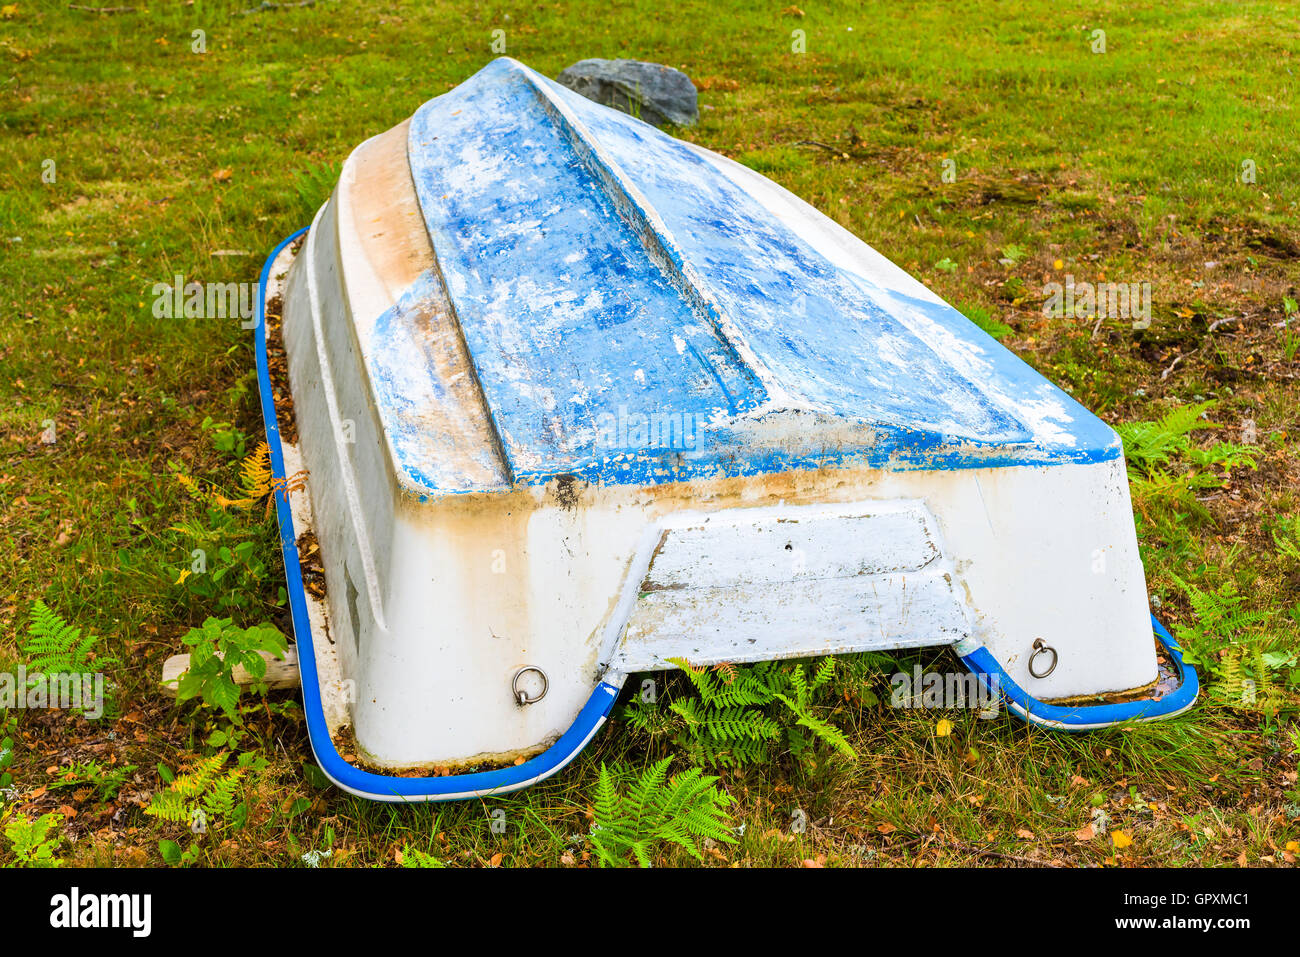 Upside down boat on land. The boat has blue keel and yellowing white sides. Dry leaves have started to accumulate around it. Stock Photo